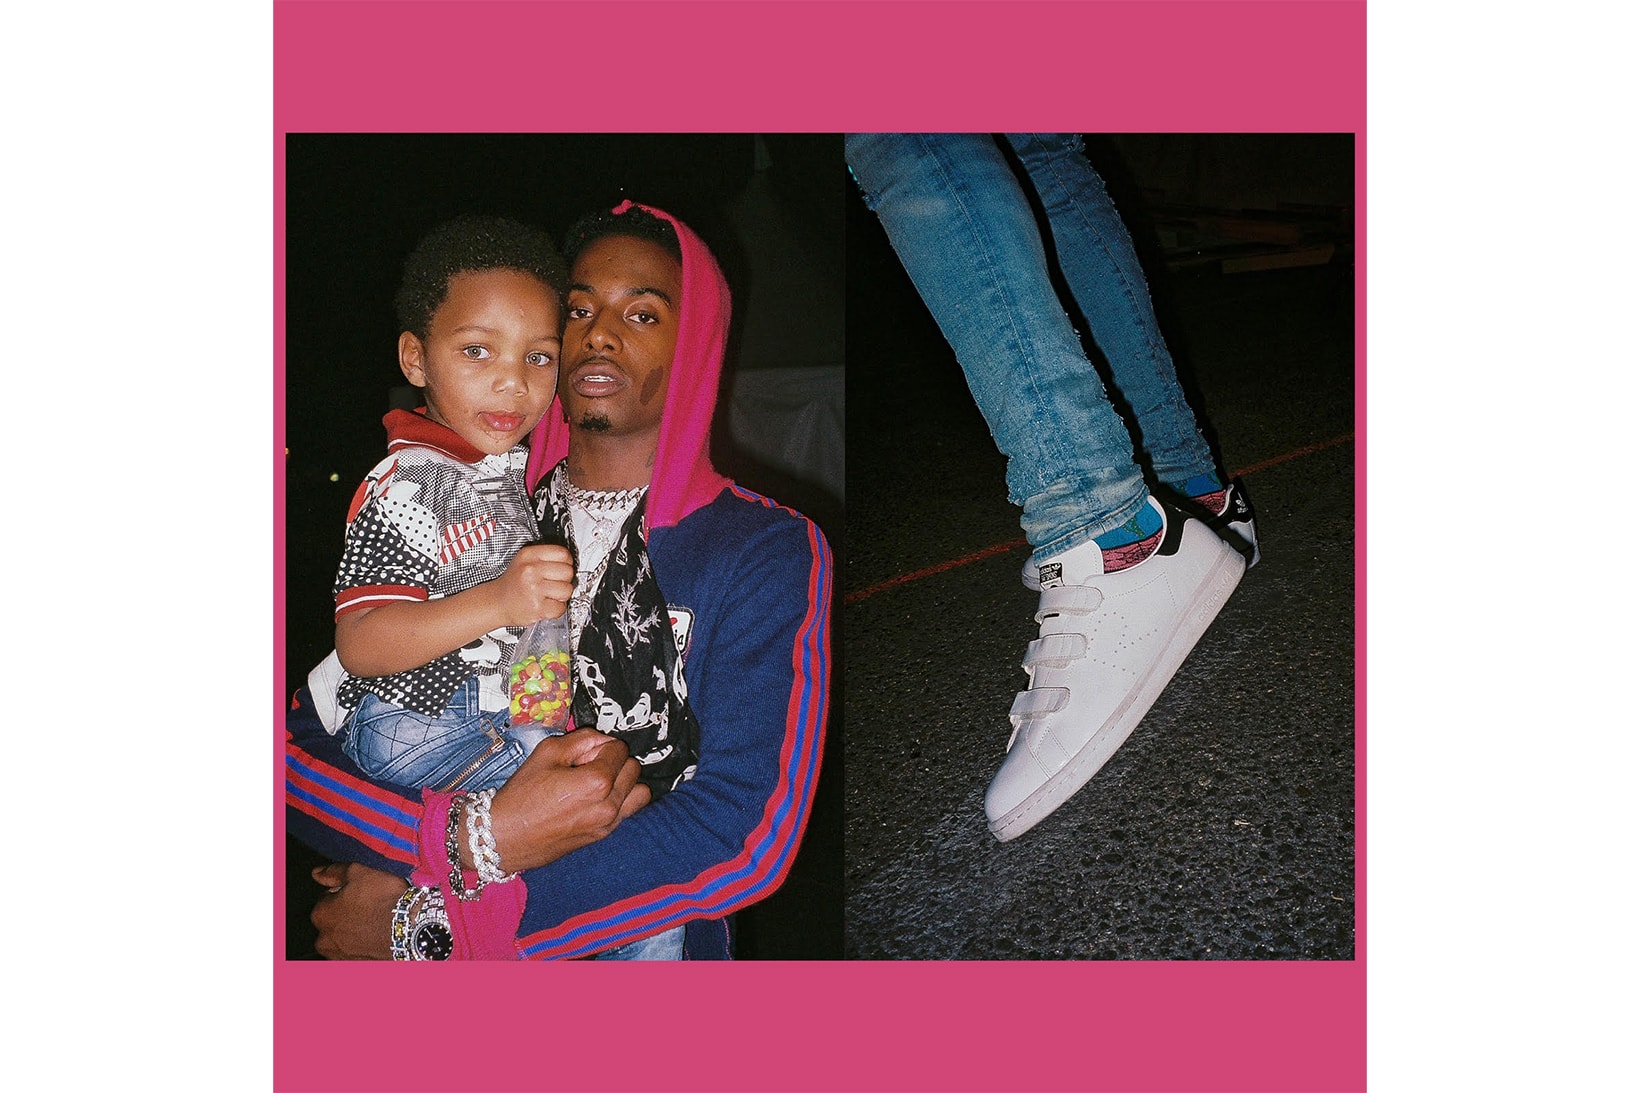 ROOFTOP FEET Editorial Part 1 Steve Lacey Playboi Carti Lil Yachty